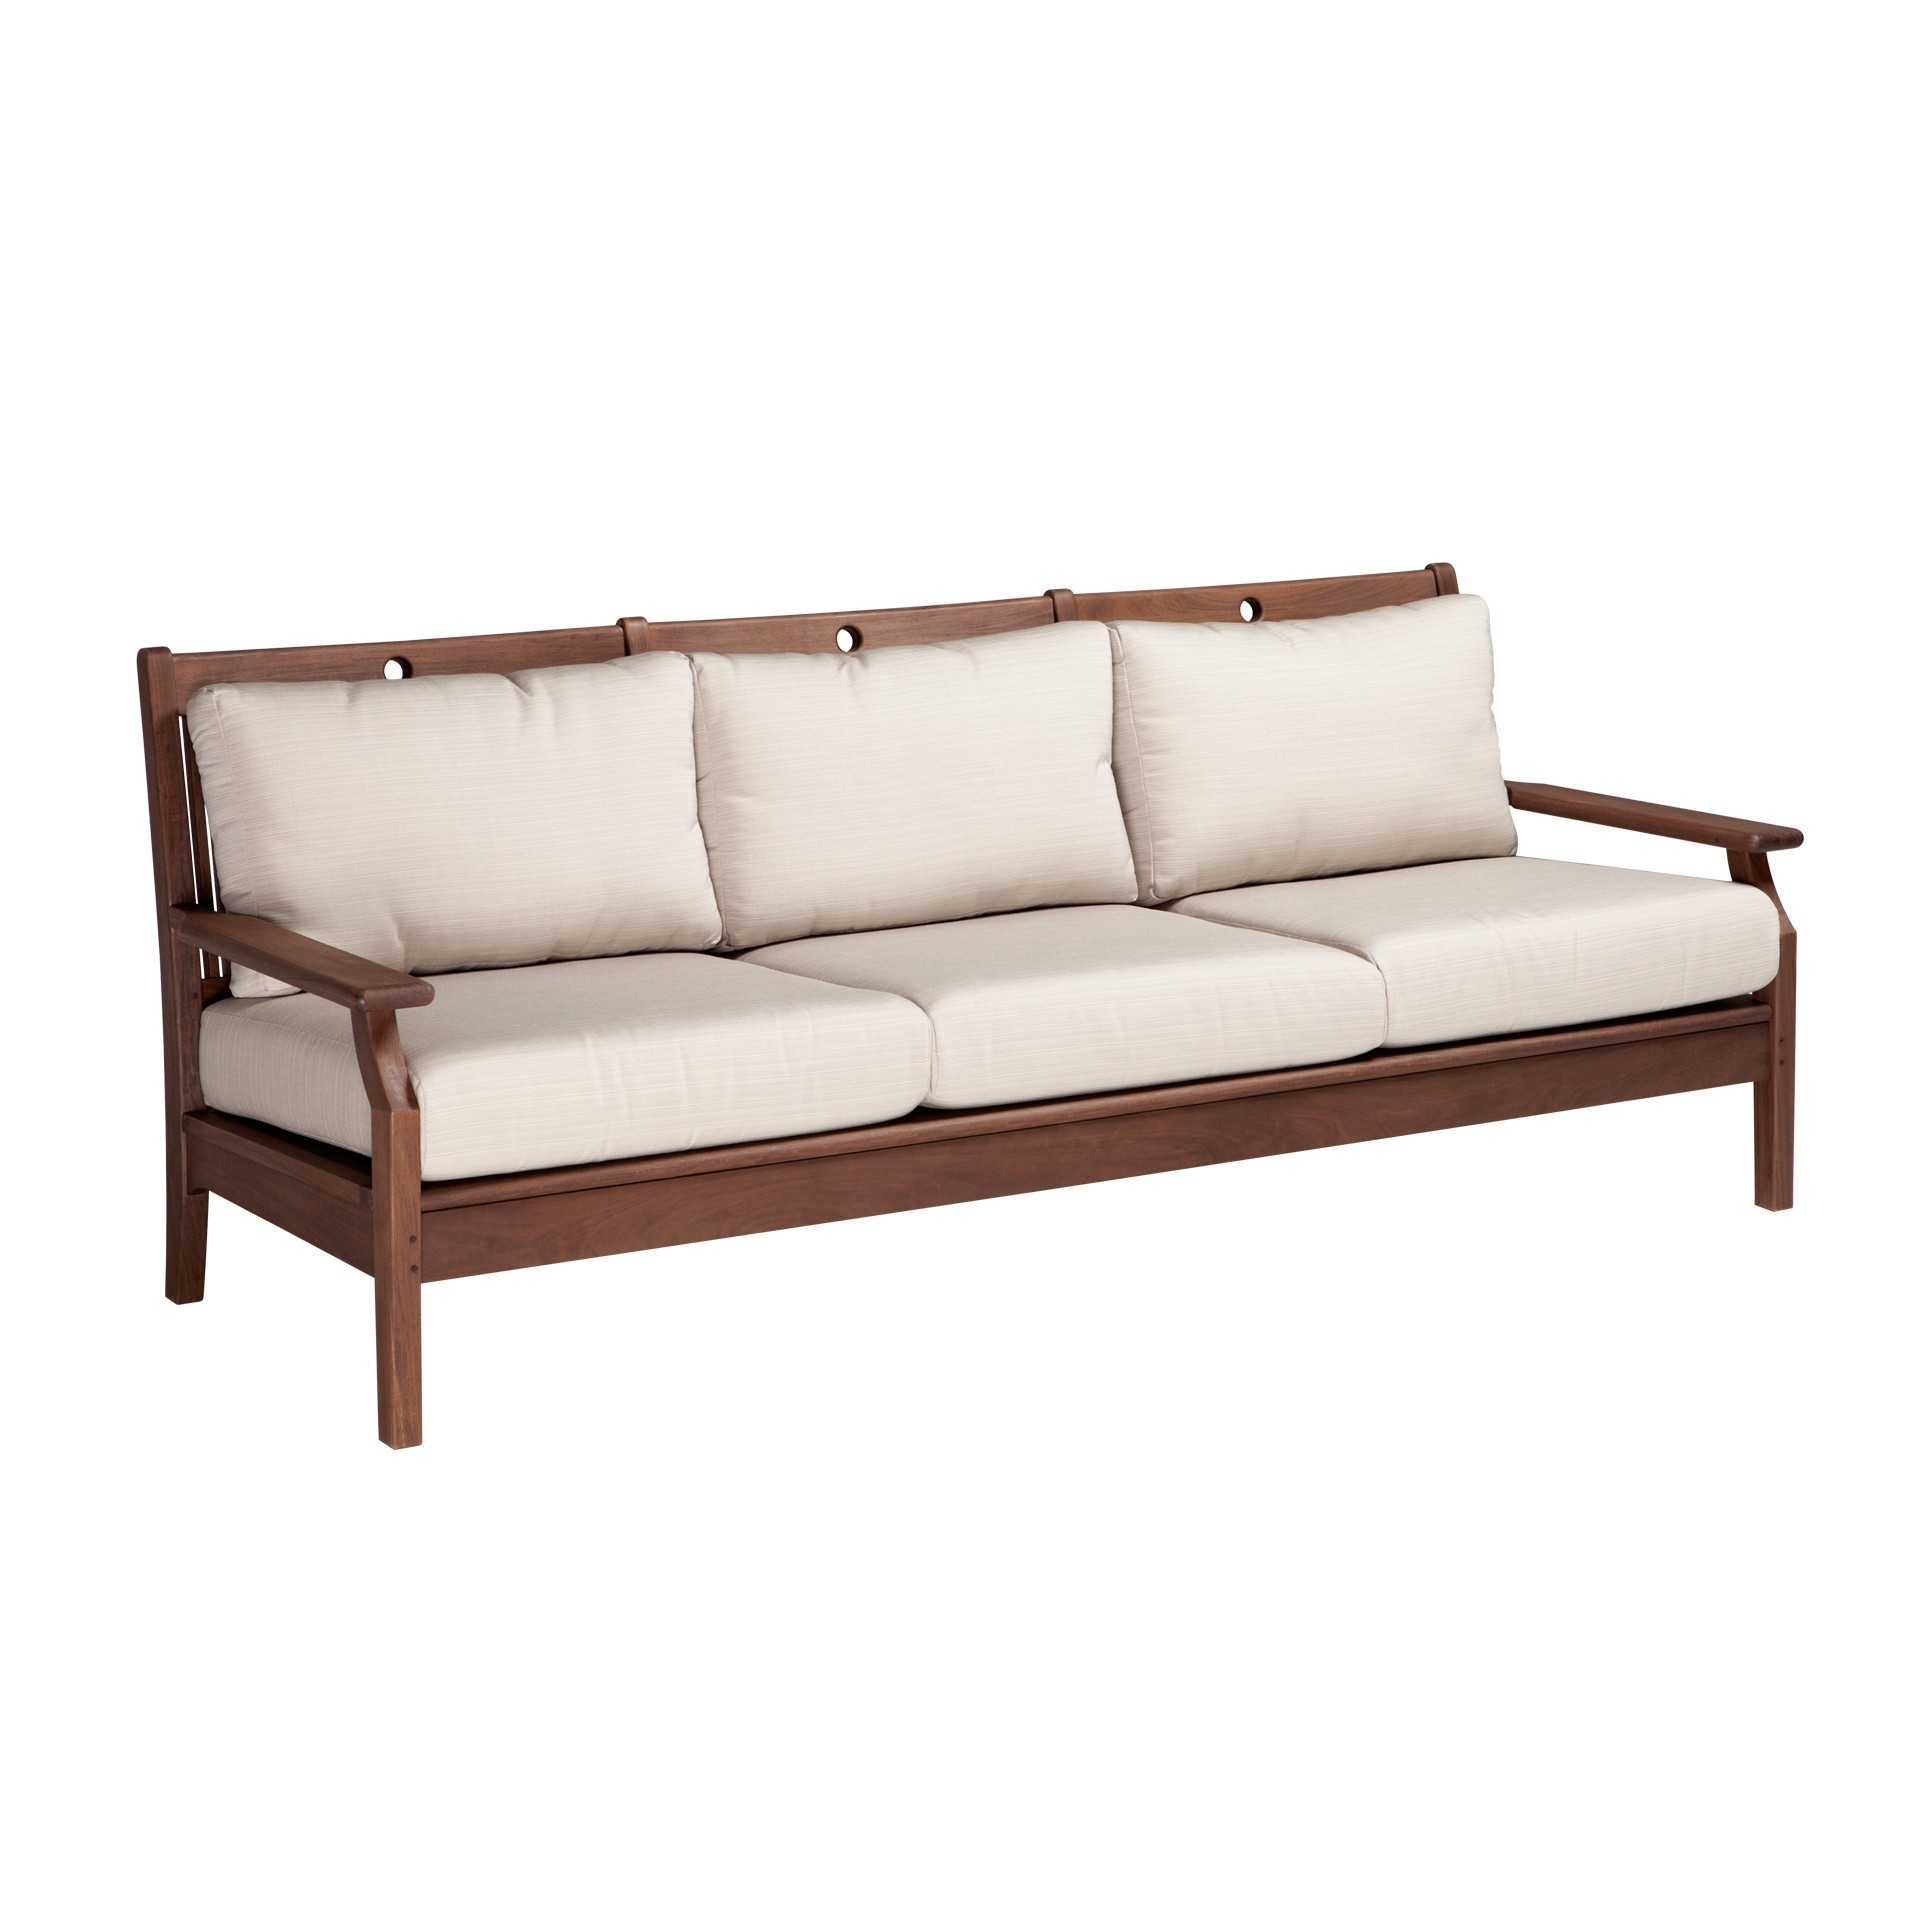 Opal sofa from hausers patio in san diego ca luxury outdoor living by hausers patio